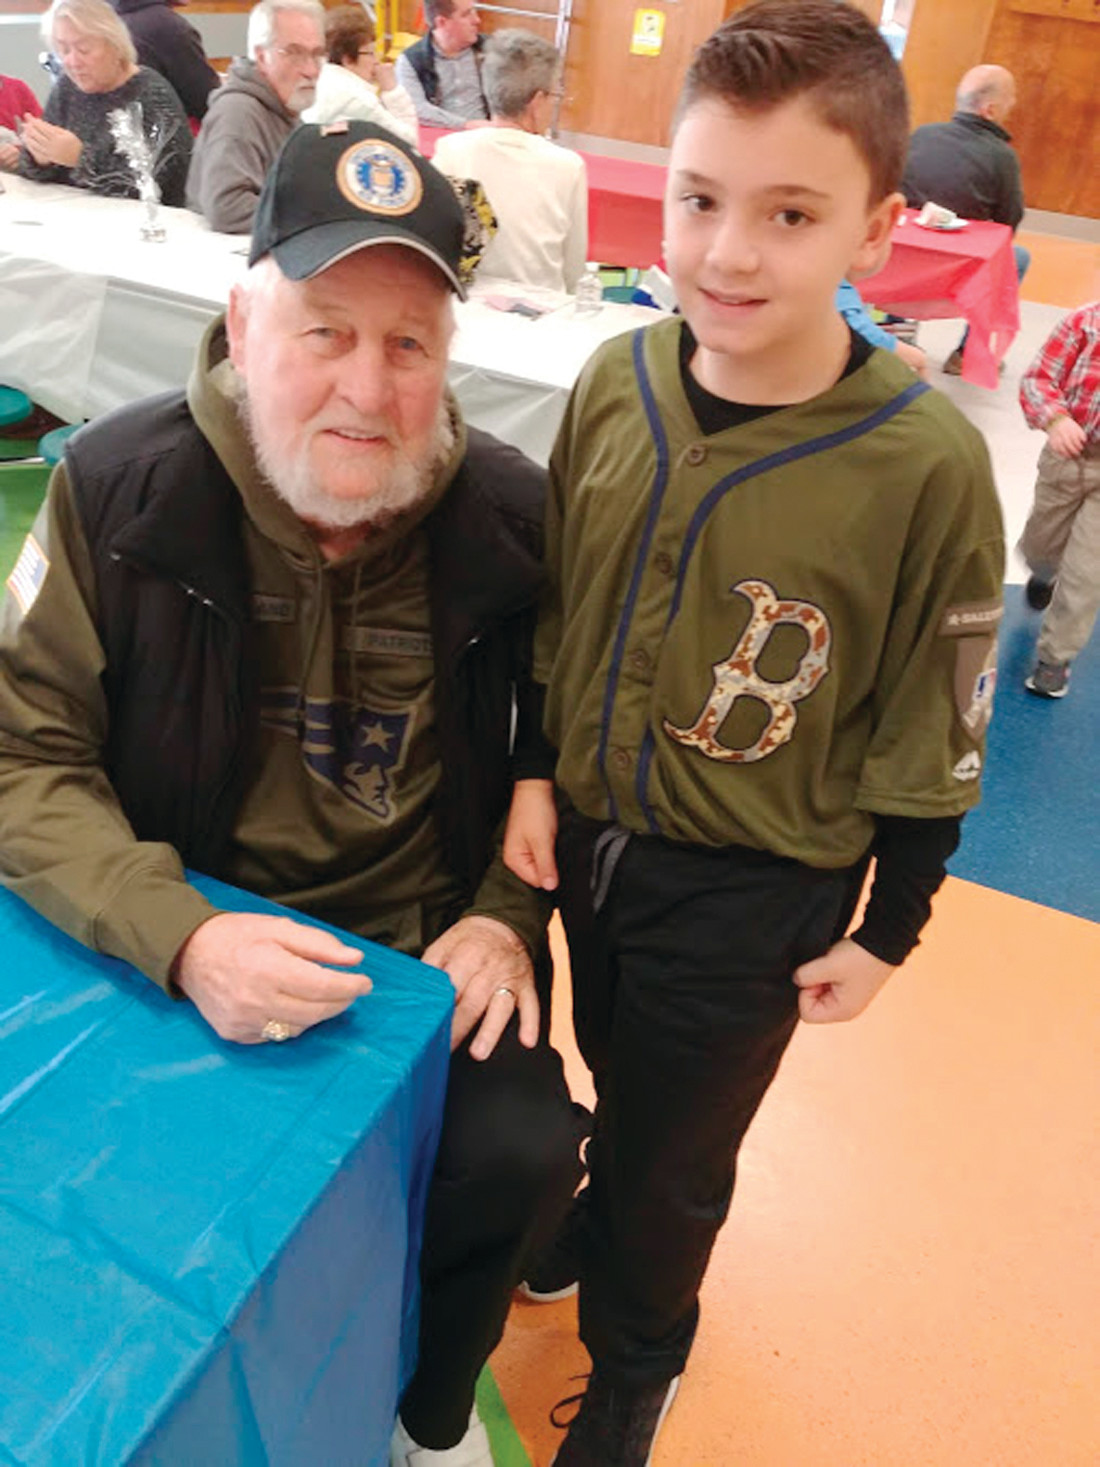 PROUD GRANDSON: Ethan Davis was proud to be present at the mornings events with his grandfather, veteran Martin Normann, who served in the Air Force for four years.